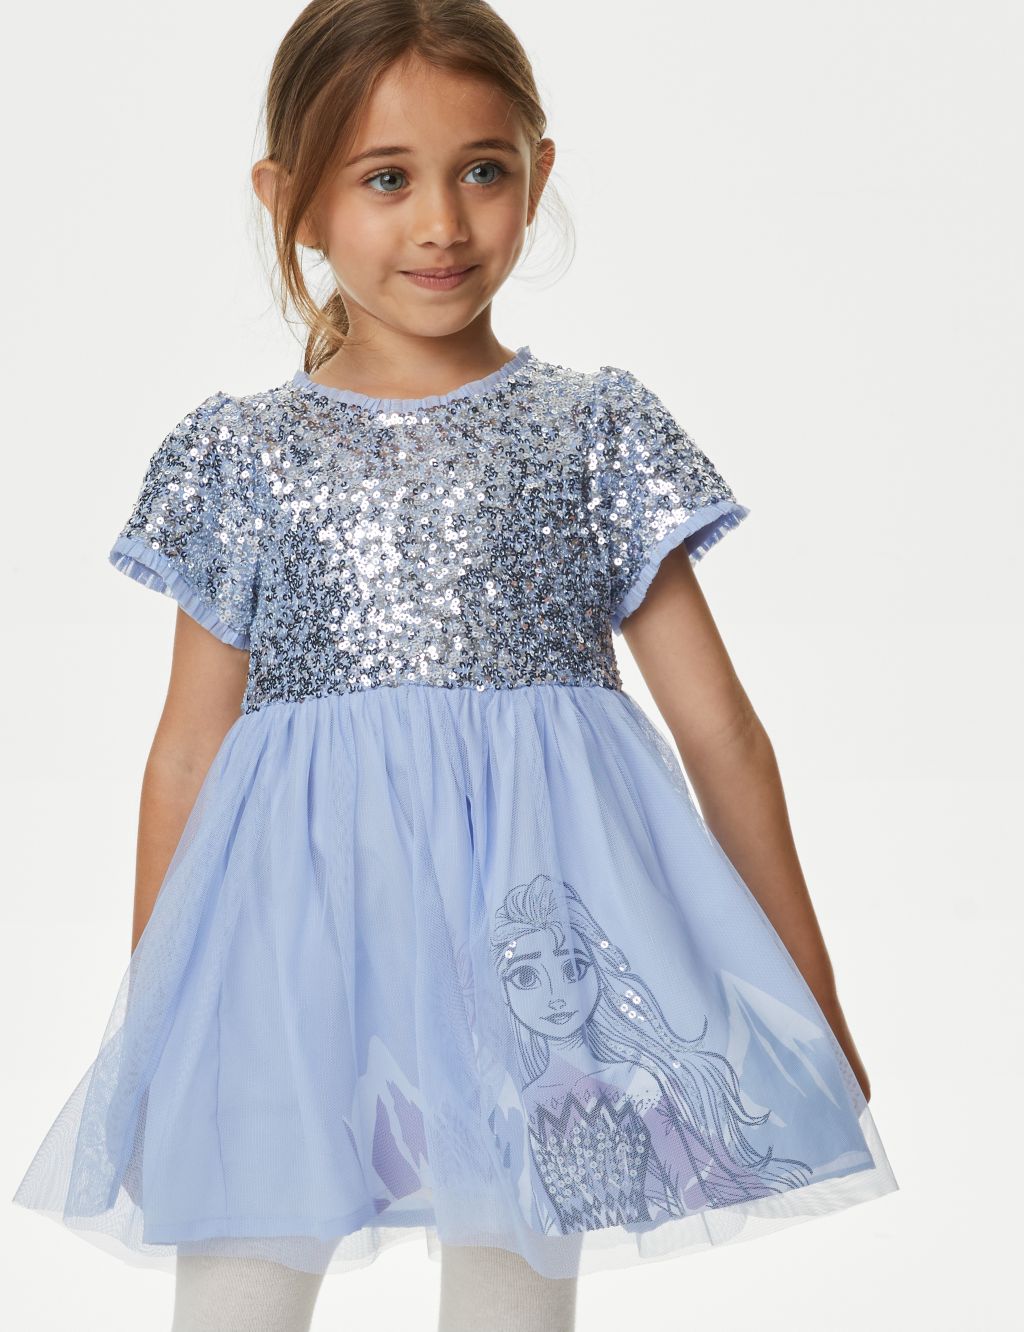 Frozen™ Sequin Tulle Dress (2-8 Yrs) image 1